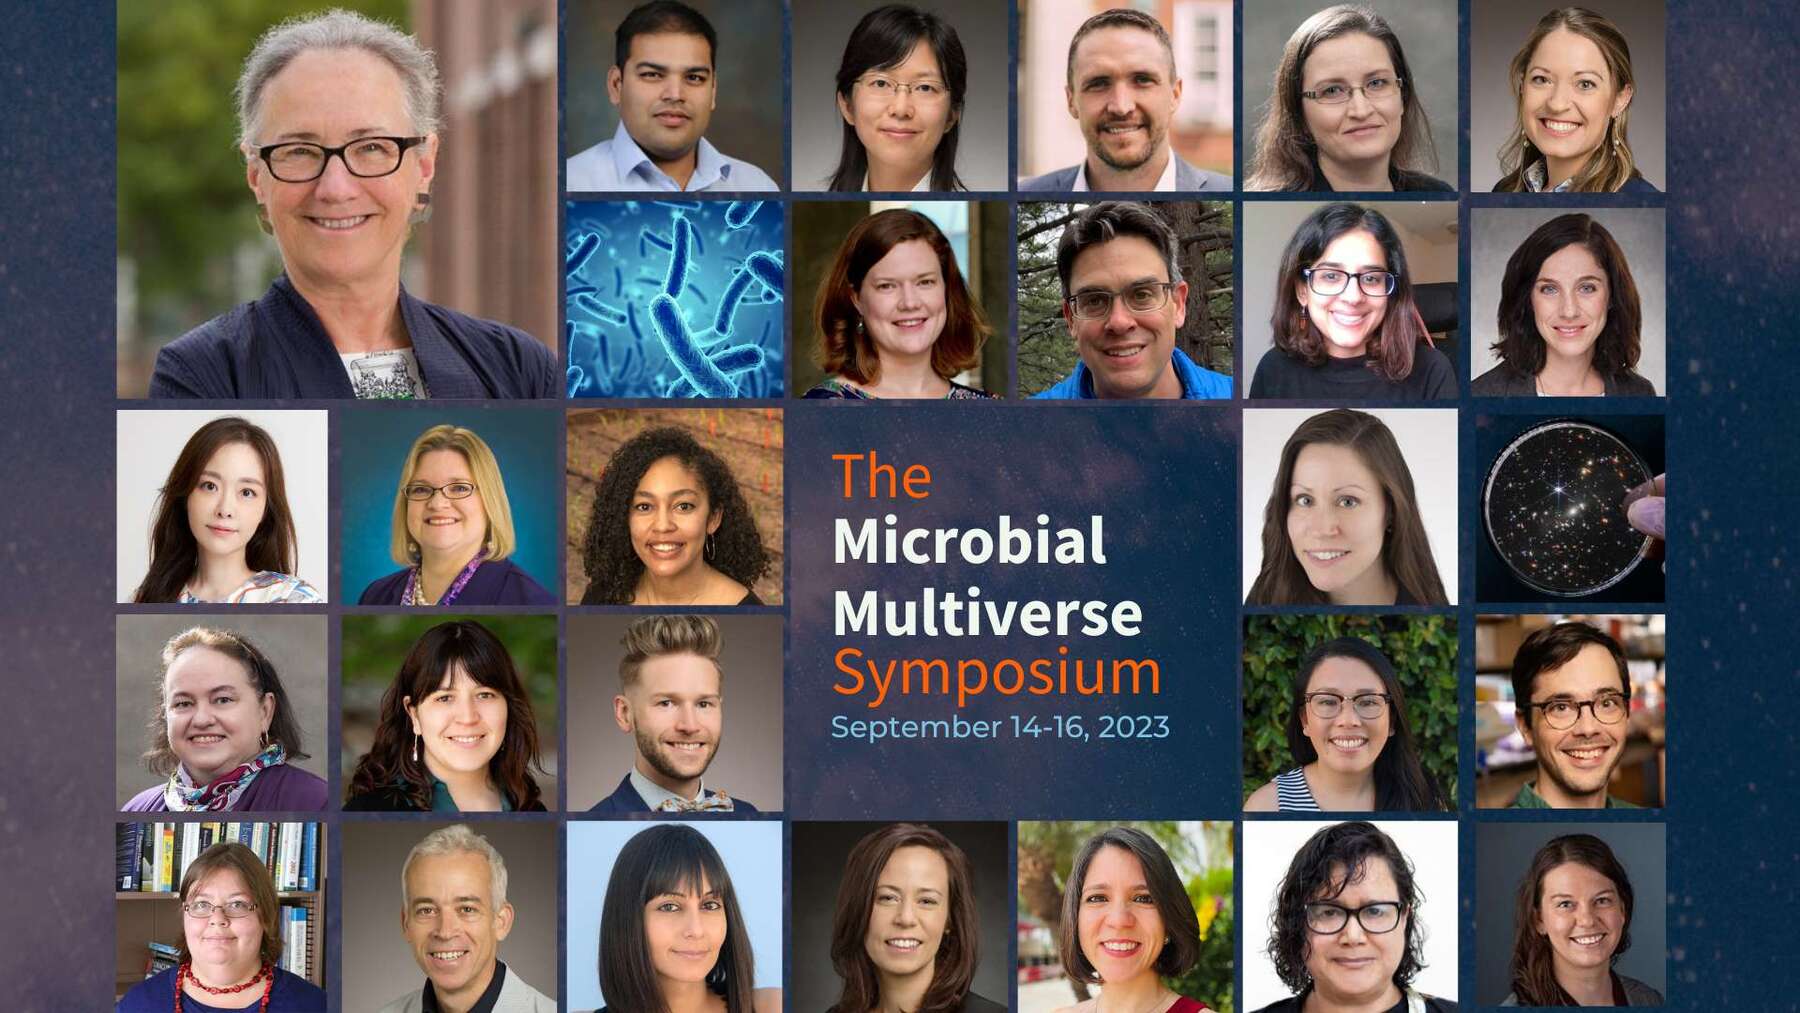 Photo Collage of headshots from speakers at the Microbial Multiverse Symposium.